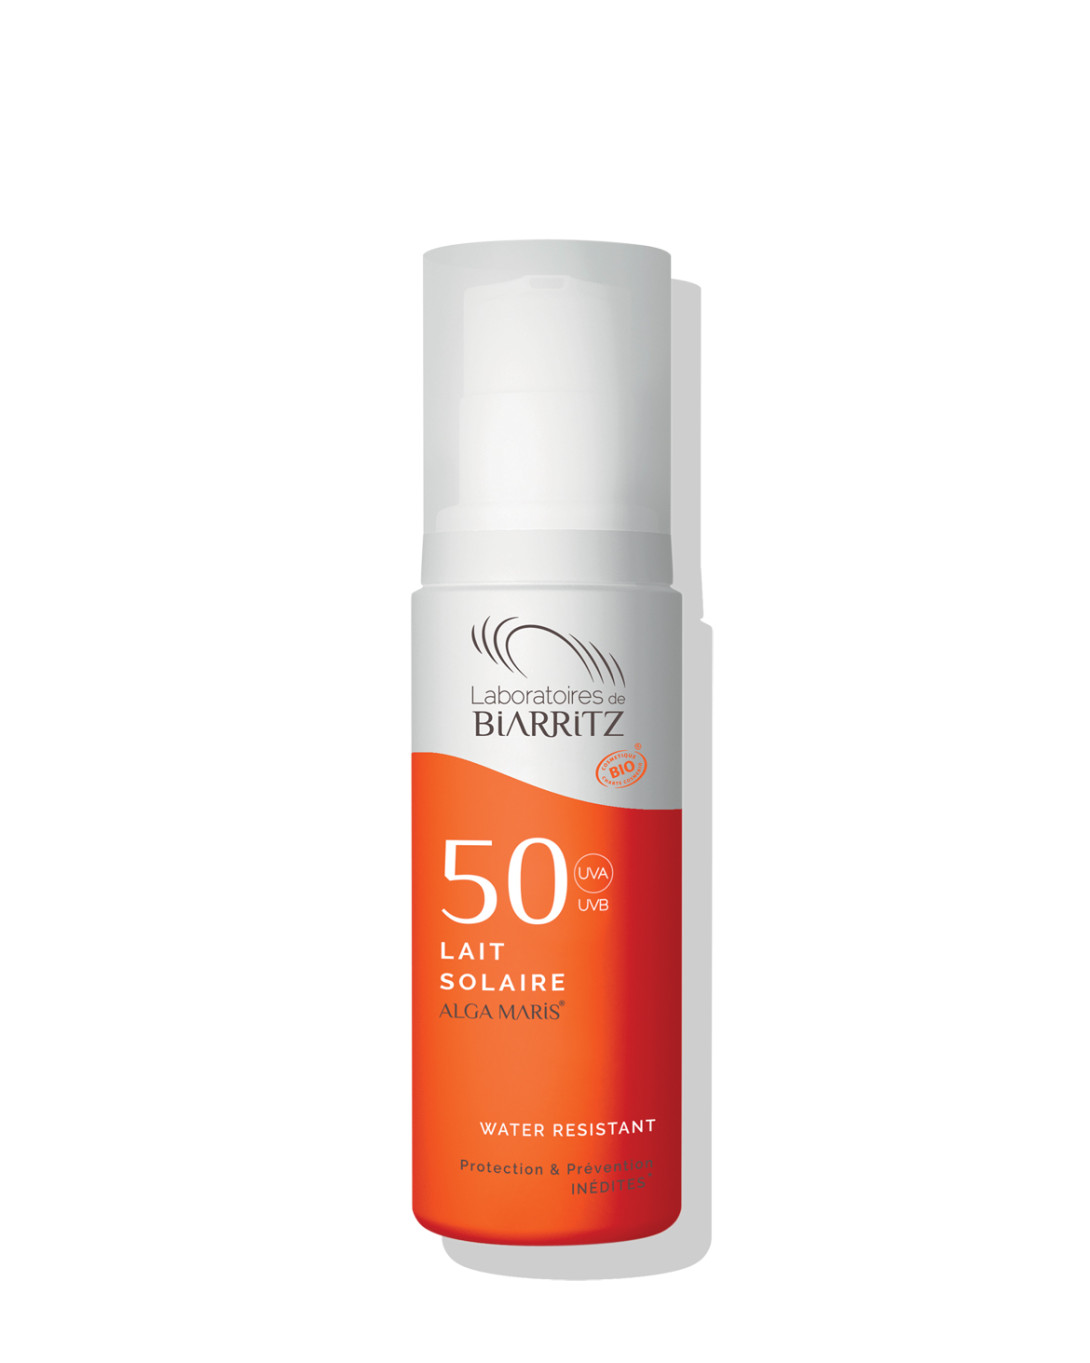 Latte Solare SPF 50+ Water Resistant